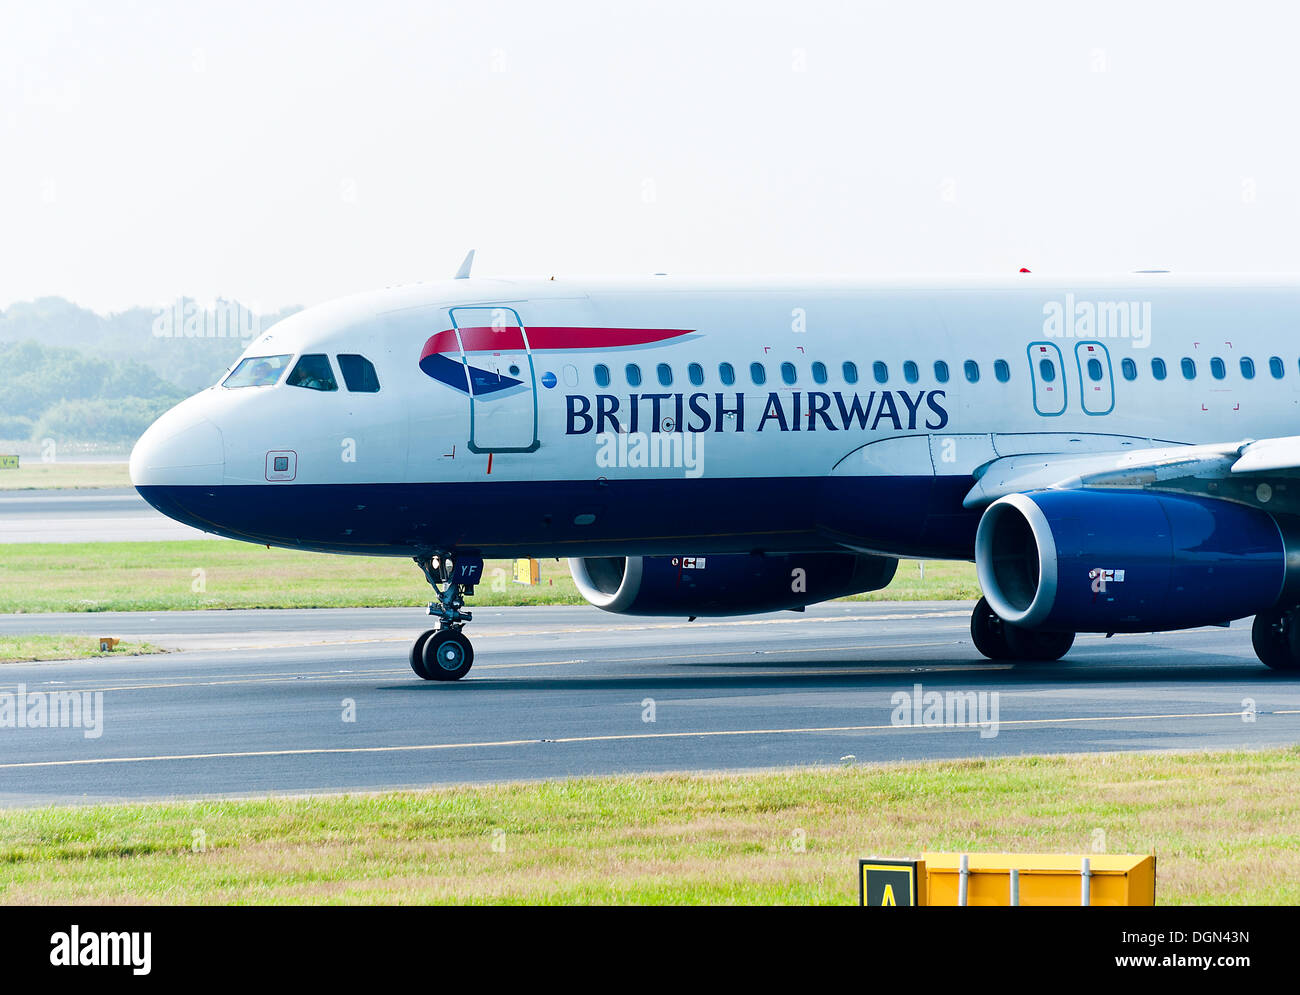 British Airways Airbus A320 Airliner Taxiing on Arrival at Manchester International Airport England United Kingdom UK Stock Photo